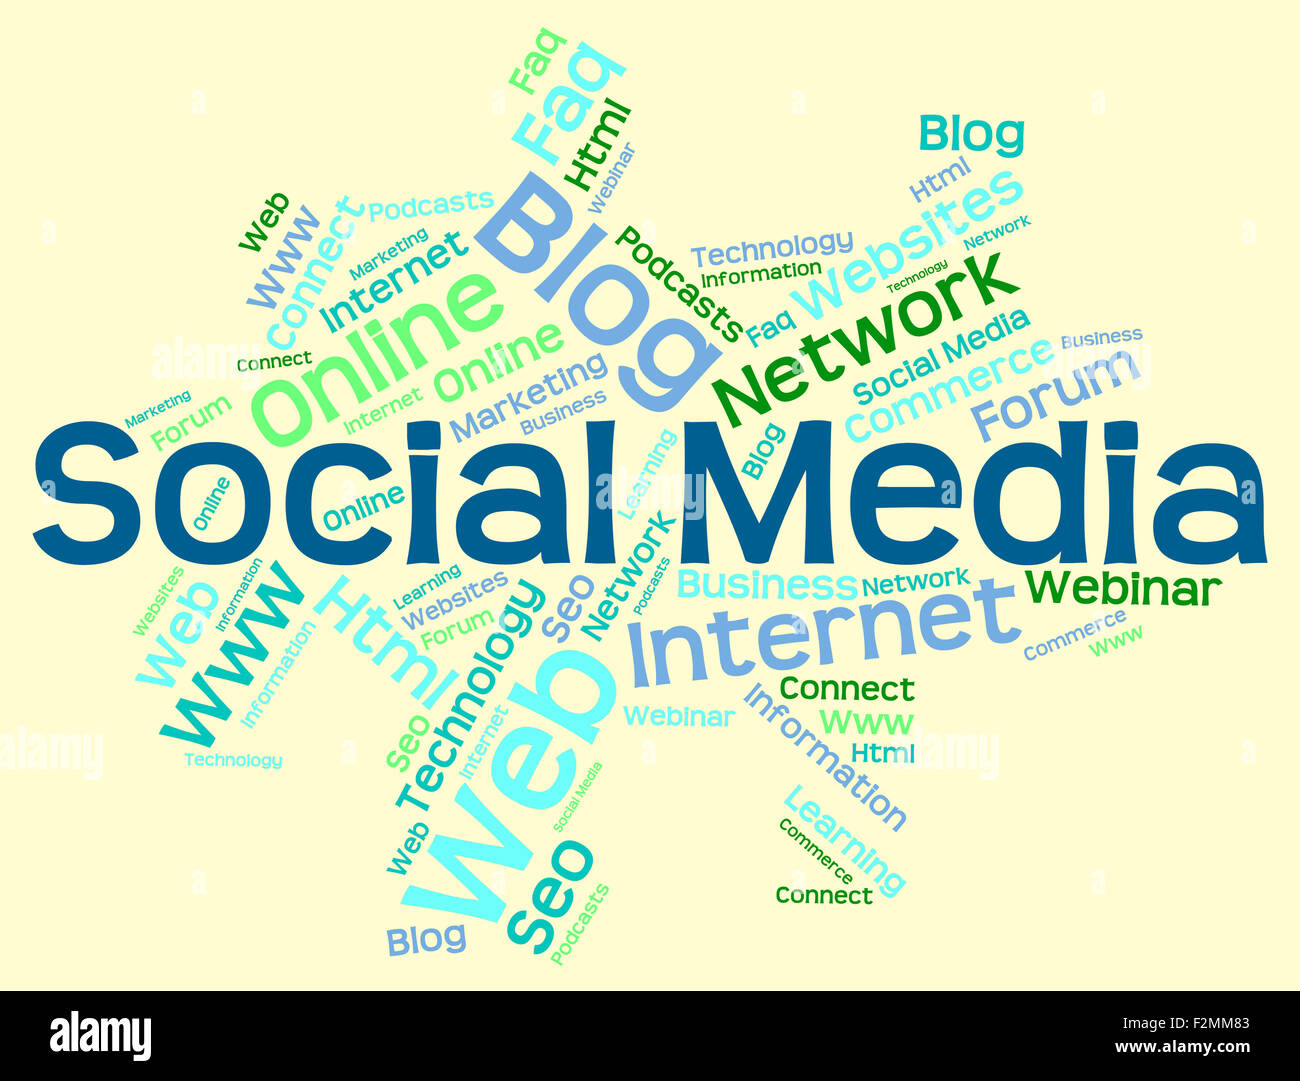 Social Media Representing Online Blogs And Blogging Stock Photo